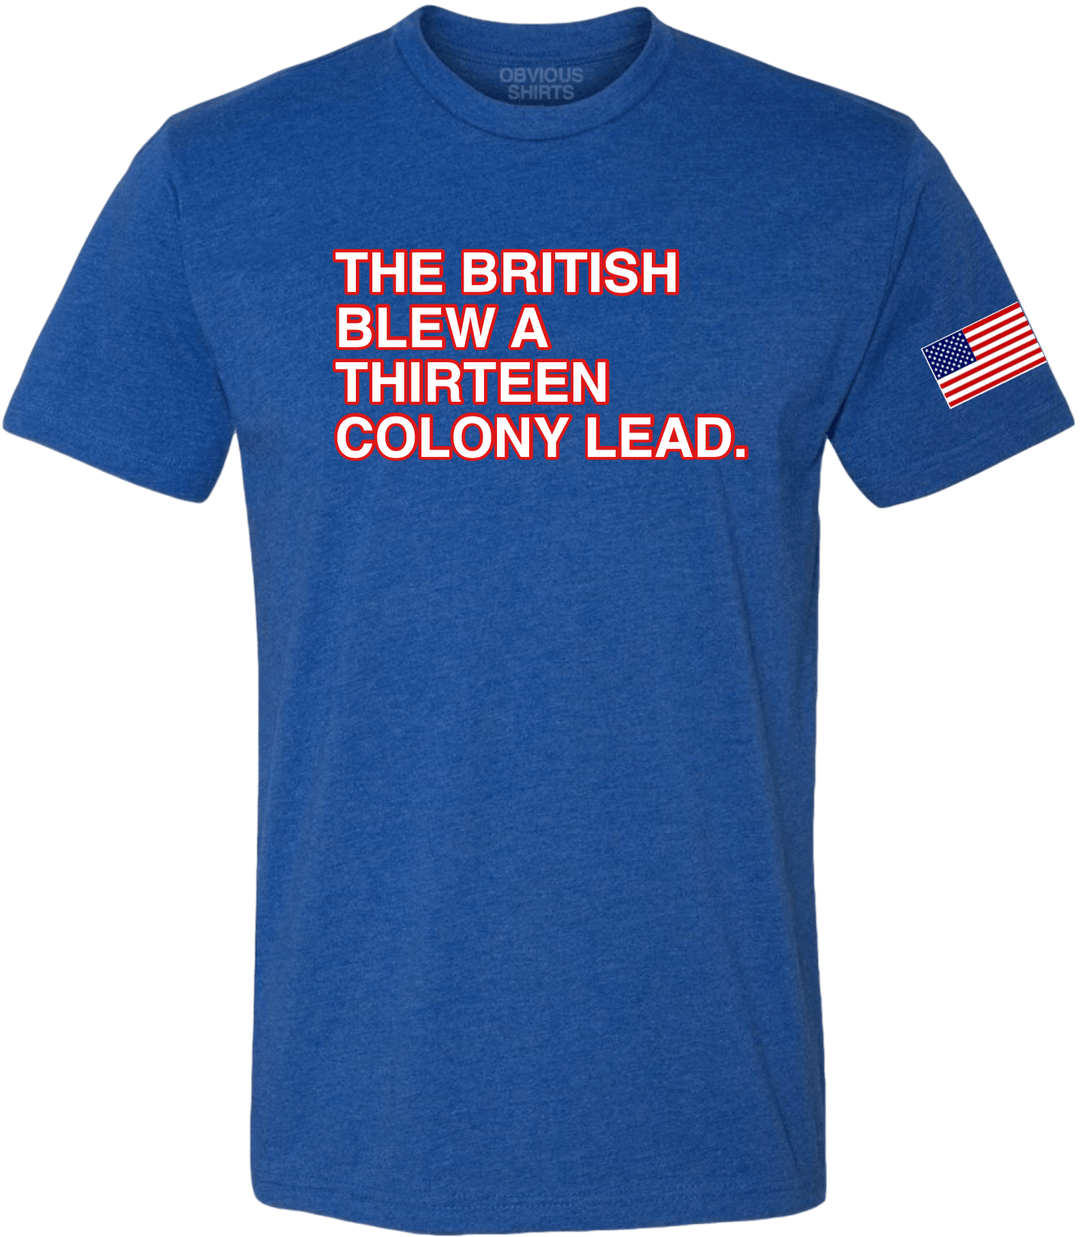 THE BRITISH BLEW A THIRTEEN COLONY LEAD. - OBVIOUS SHIRTS.